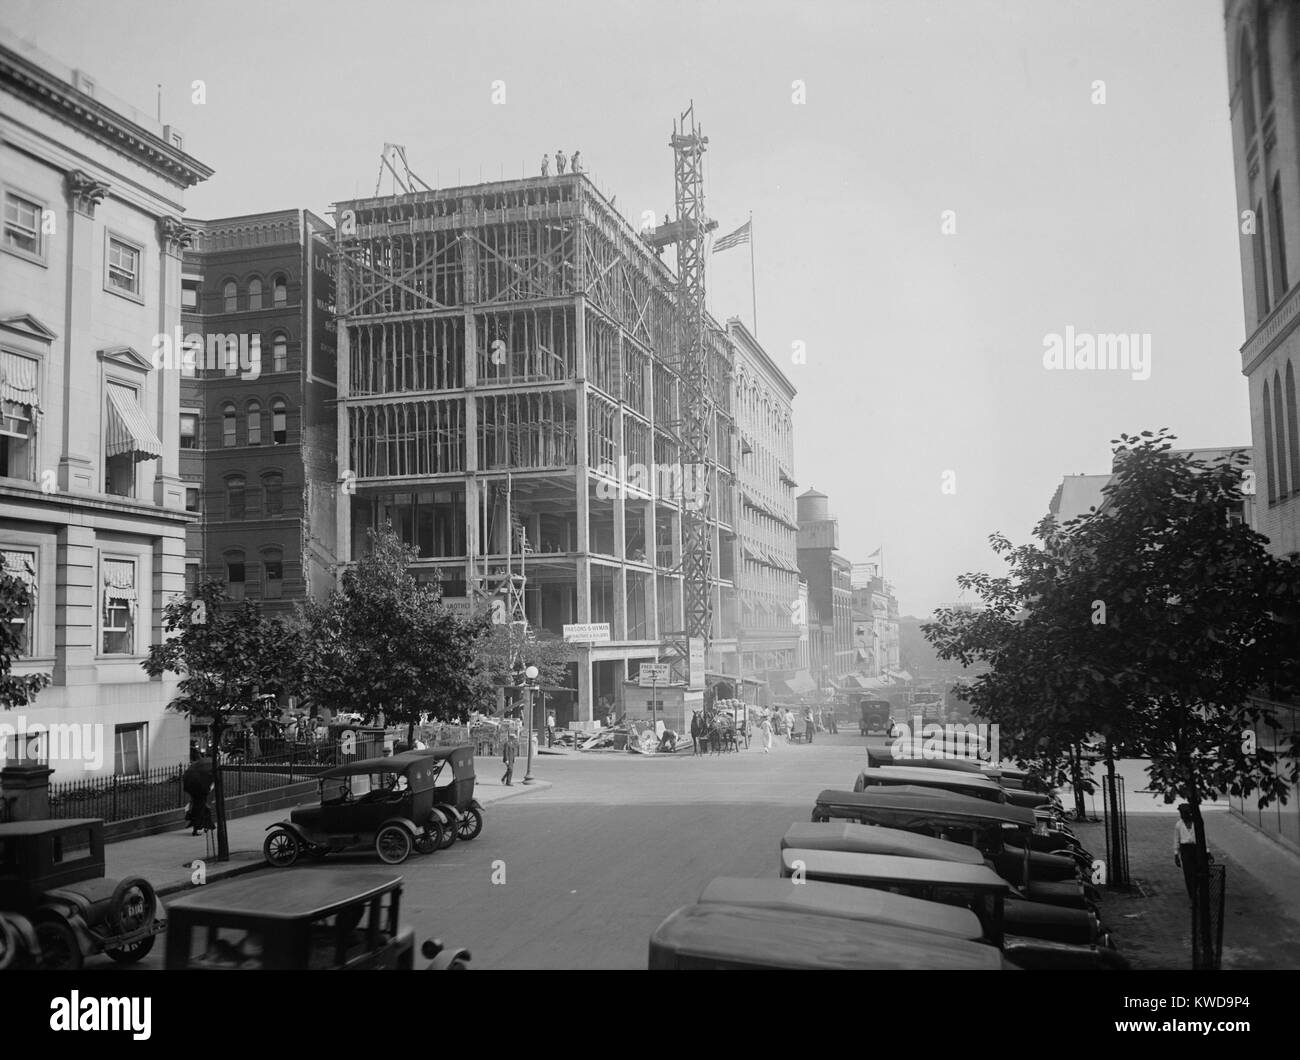 Lansburgh Brothers department store building under construction c. 1915. The six story grid framework was made of reinforced concrete on the corner of 8th and 'E' Streets, Washington, D.C. (BSLOC 2016 10 44) Stock Photo